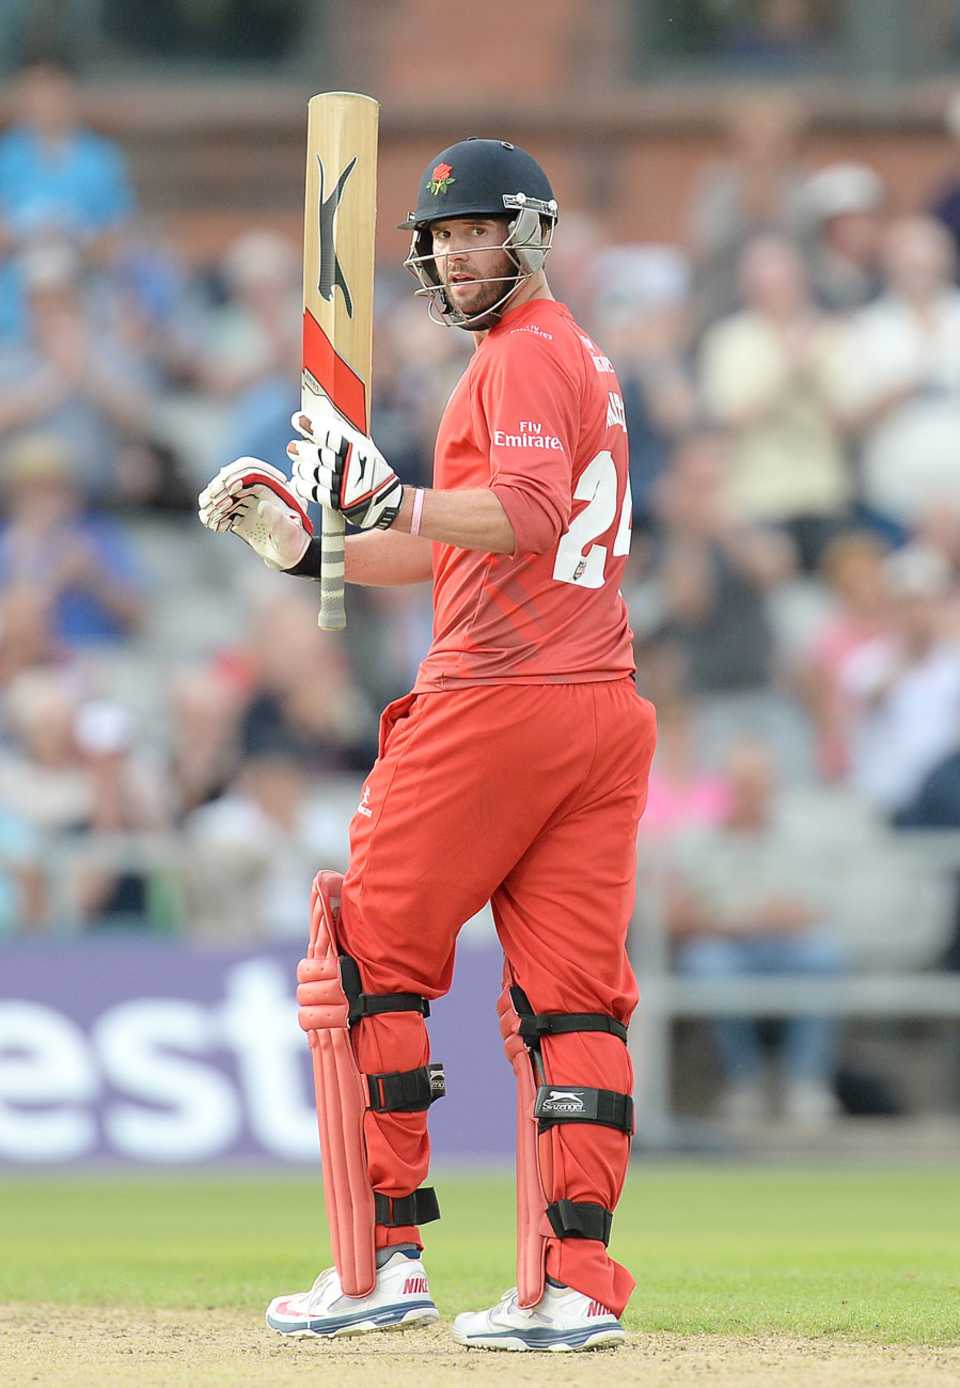 Tom Smith continued his good form with the bat